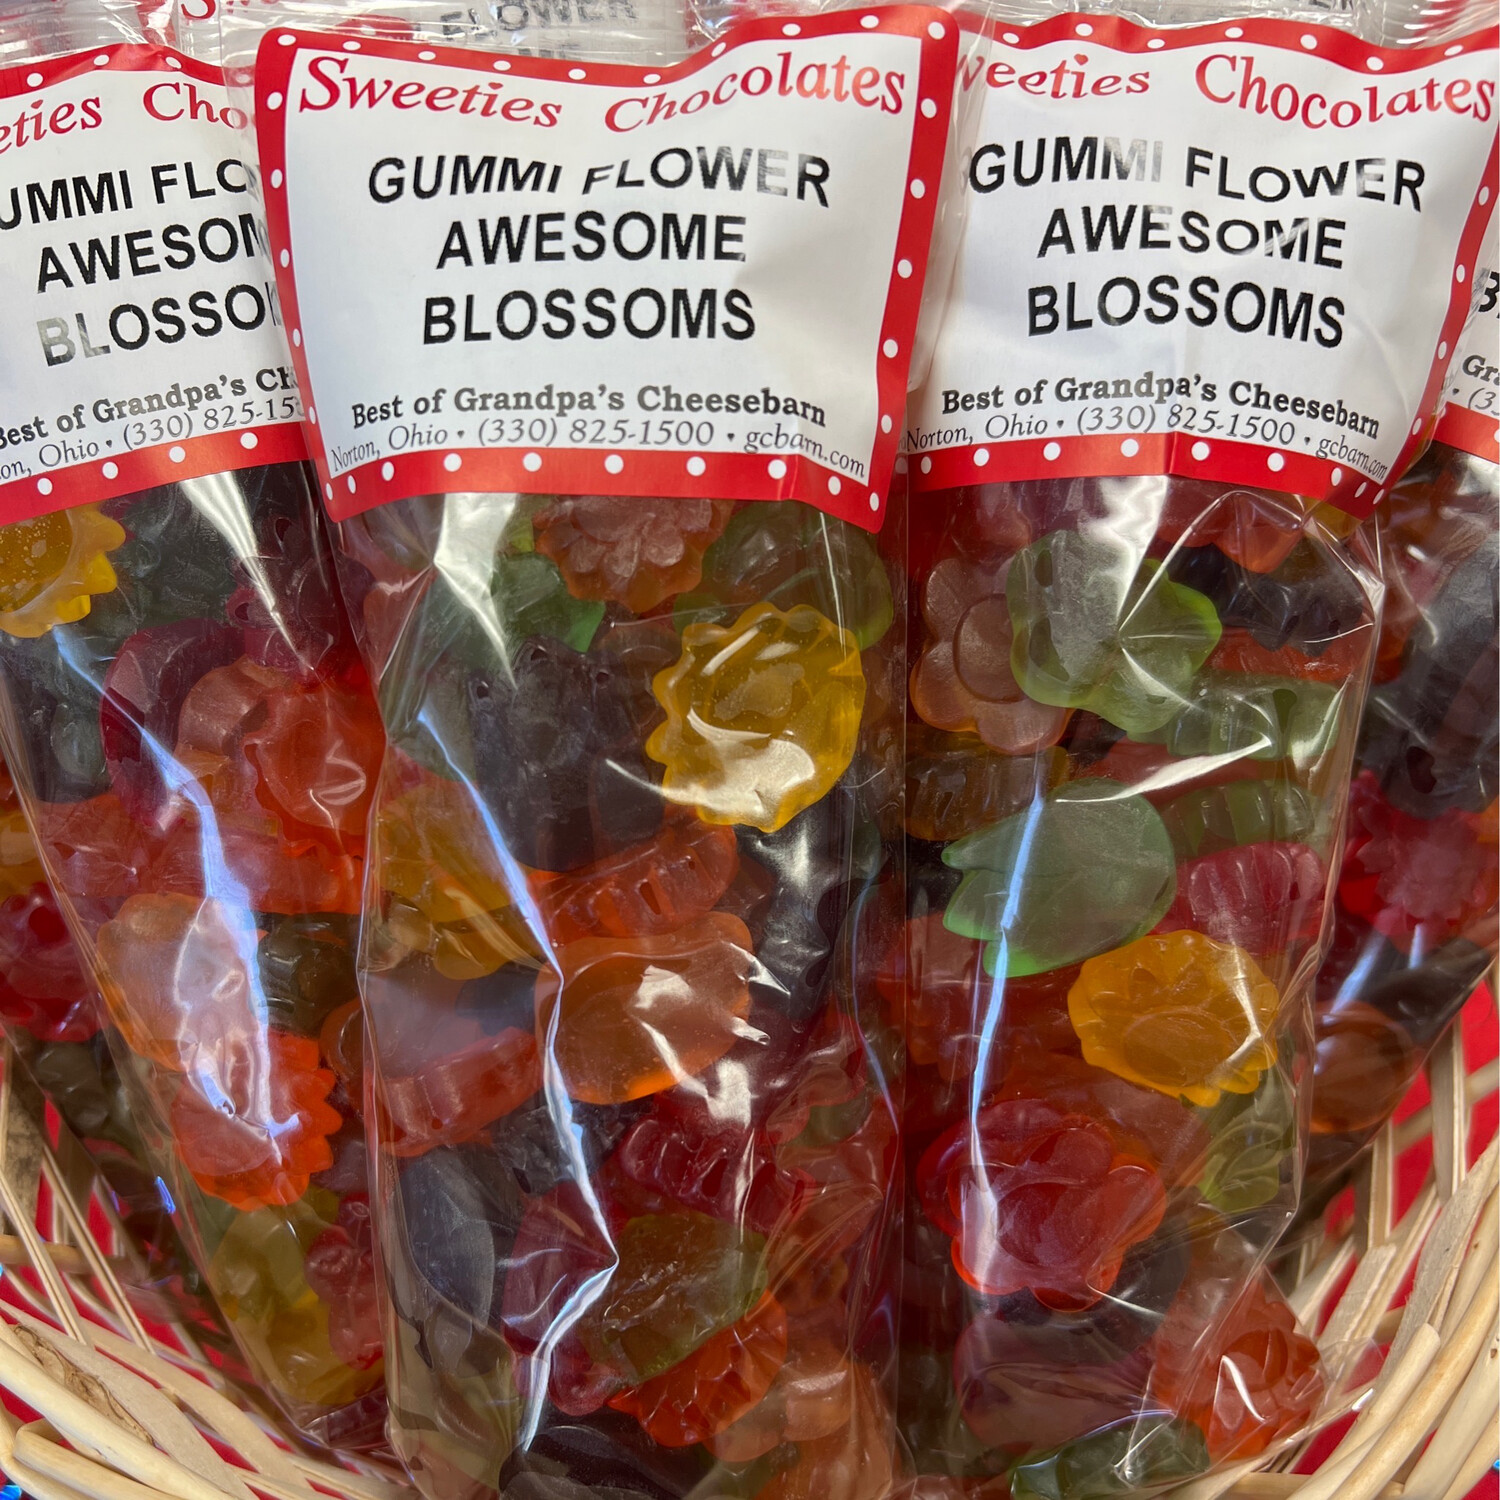 SweetGourmet Awesome Blossoms Spring Flower Gummy Candy | 2 Pounds